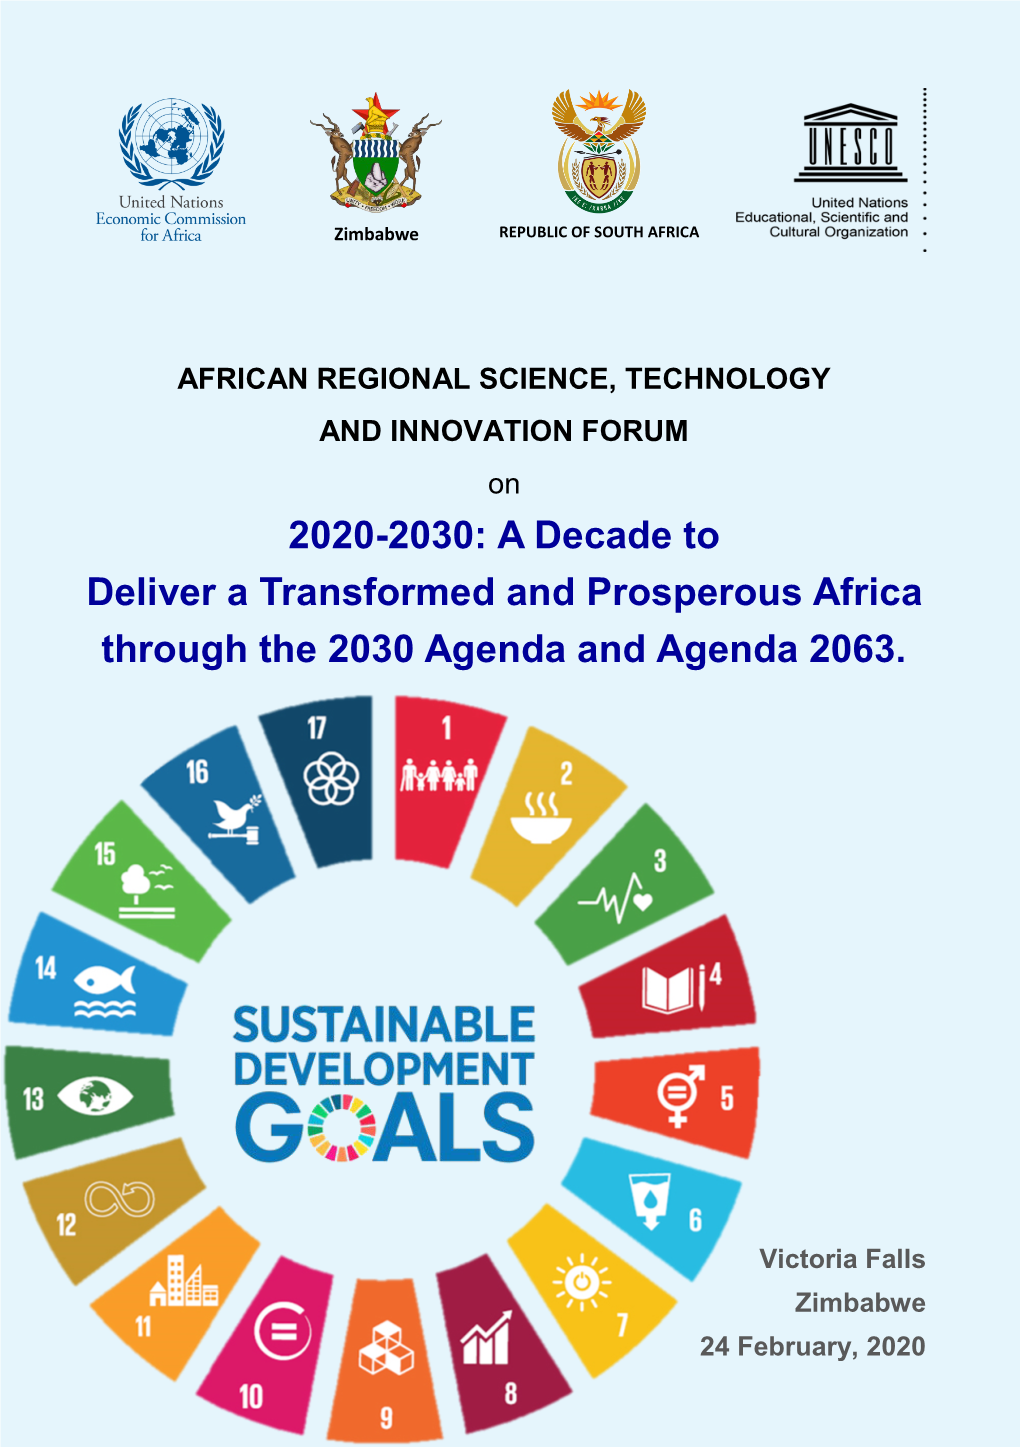 2020-2030: a Decade to Deliver a Transformed and Prosperous Africa Through the 2030 Agenda and Agenda 2063